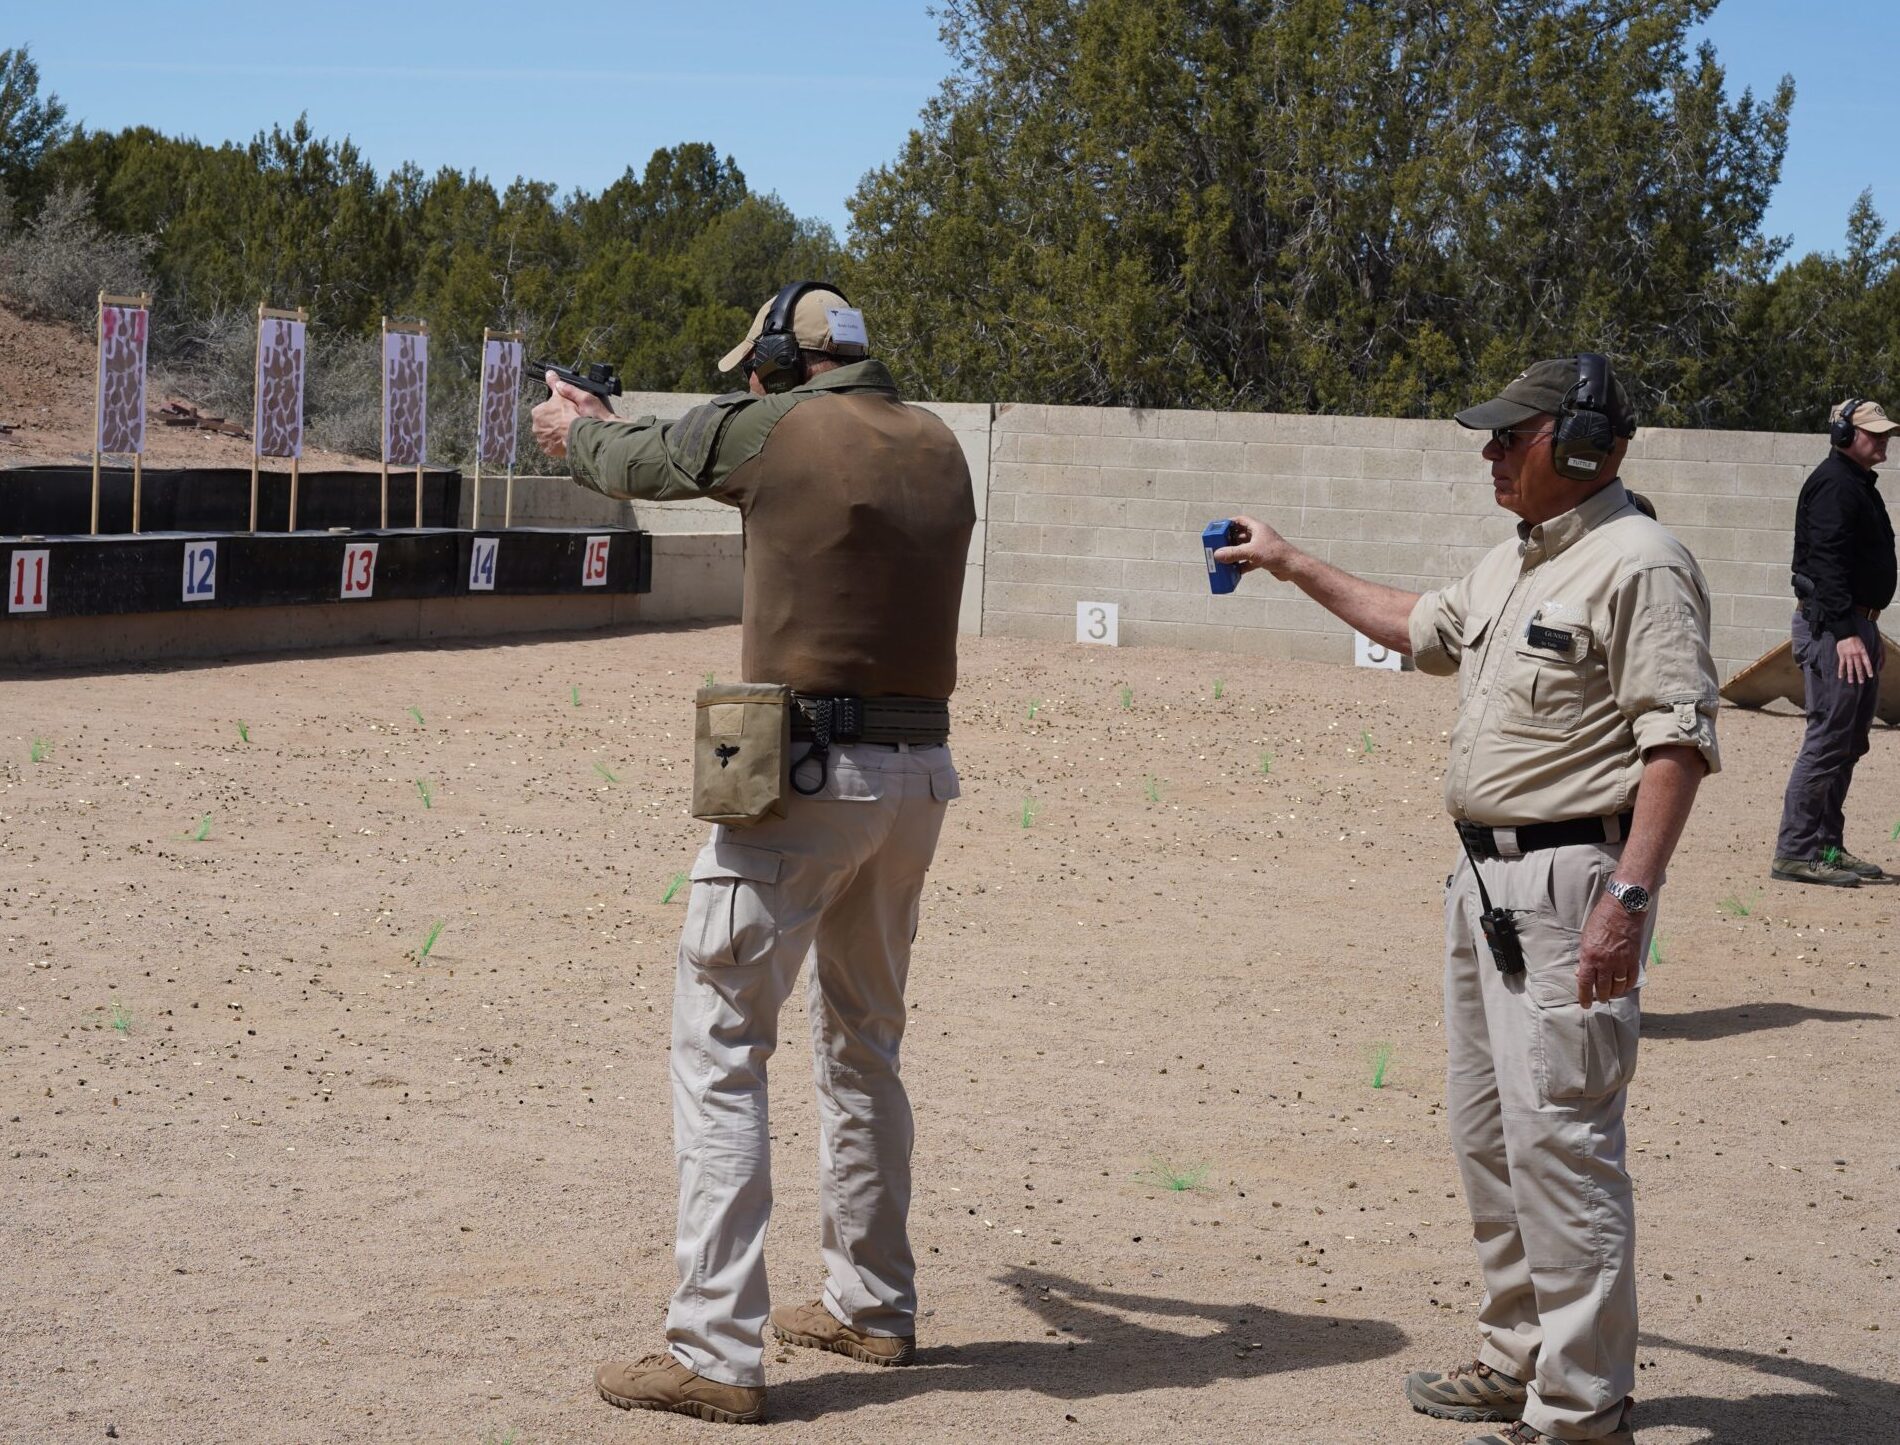 A student at Gunsite Academy demonstrates a stable shooting stance.